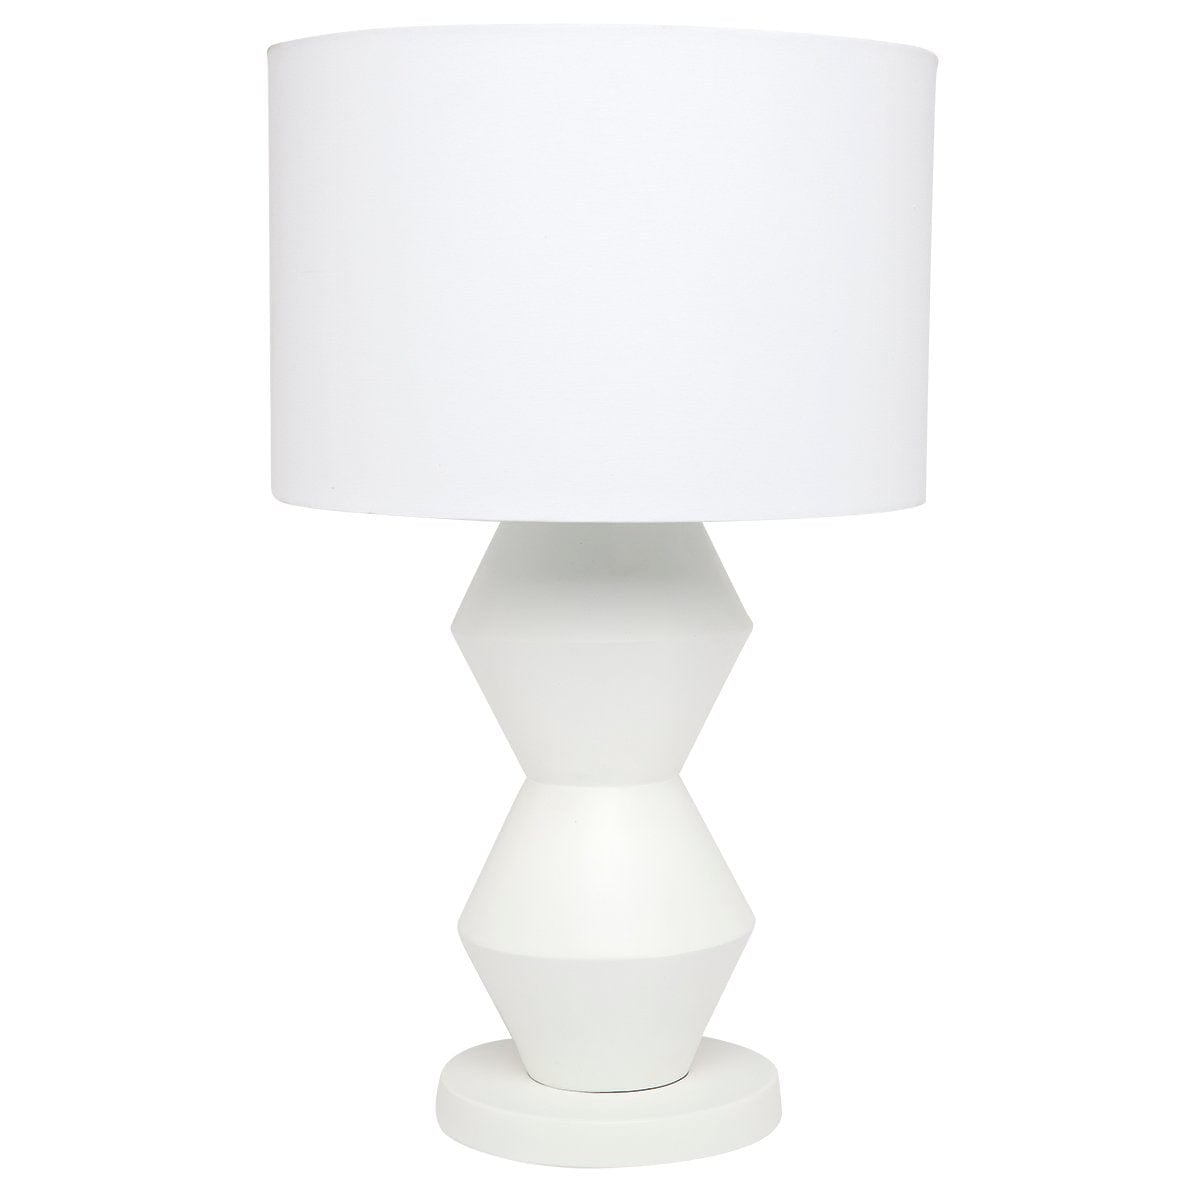 CAFE LIGHTING & LIVING Table Lamp Abstract Table Lamp - White 12281